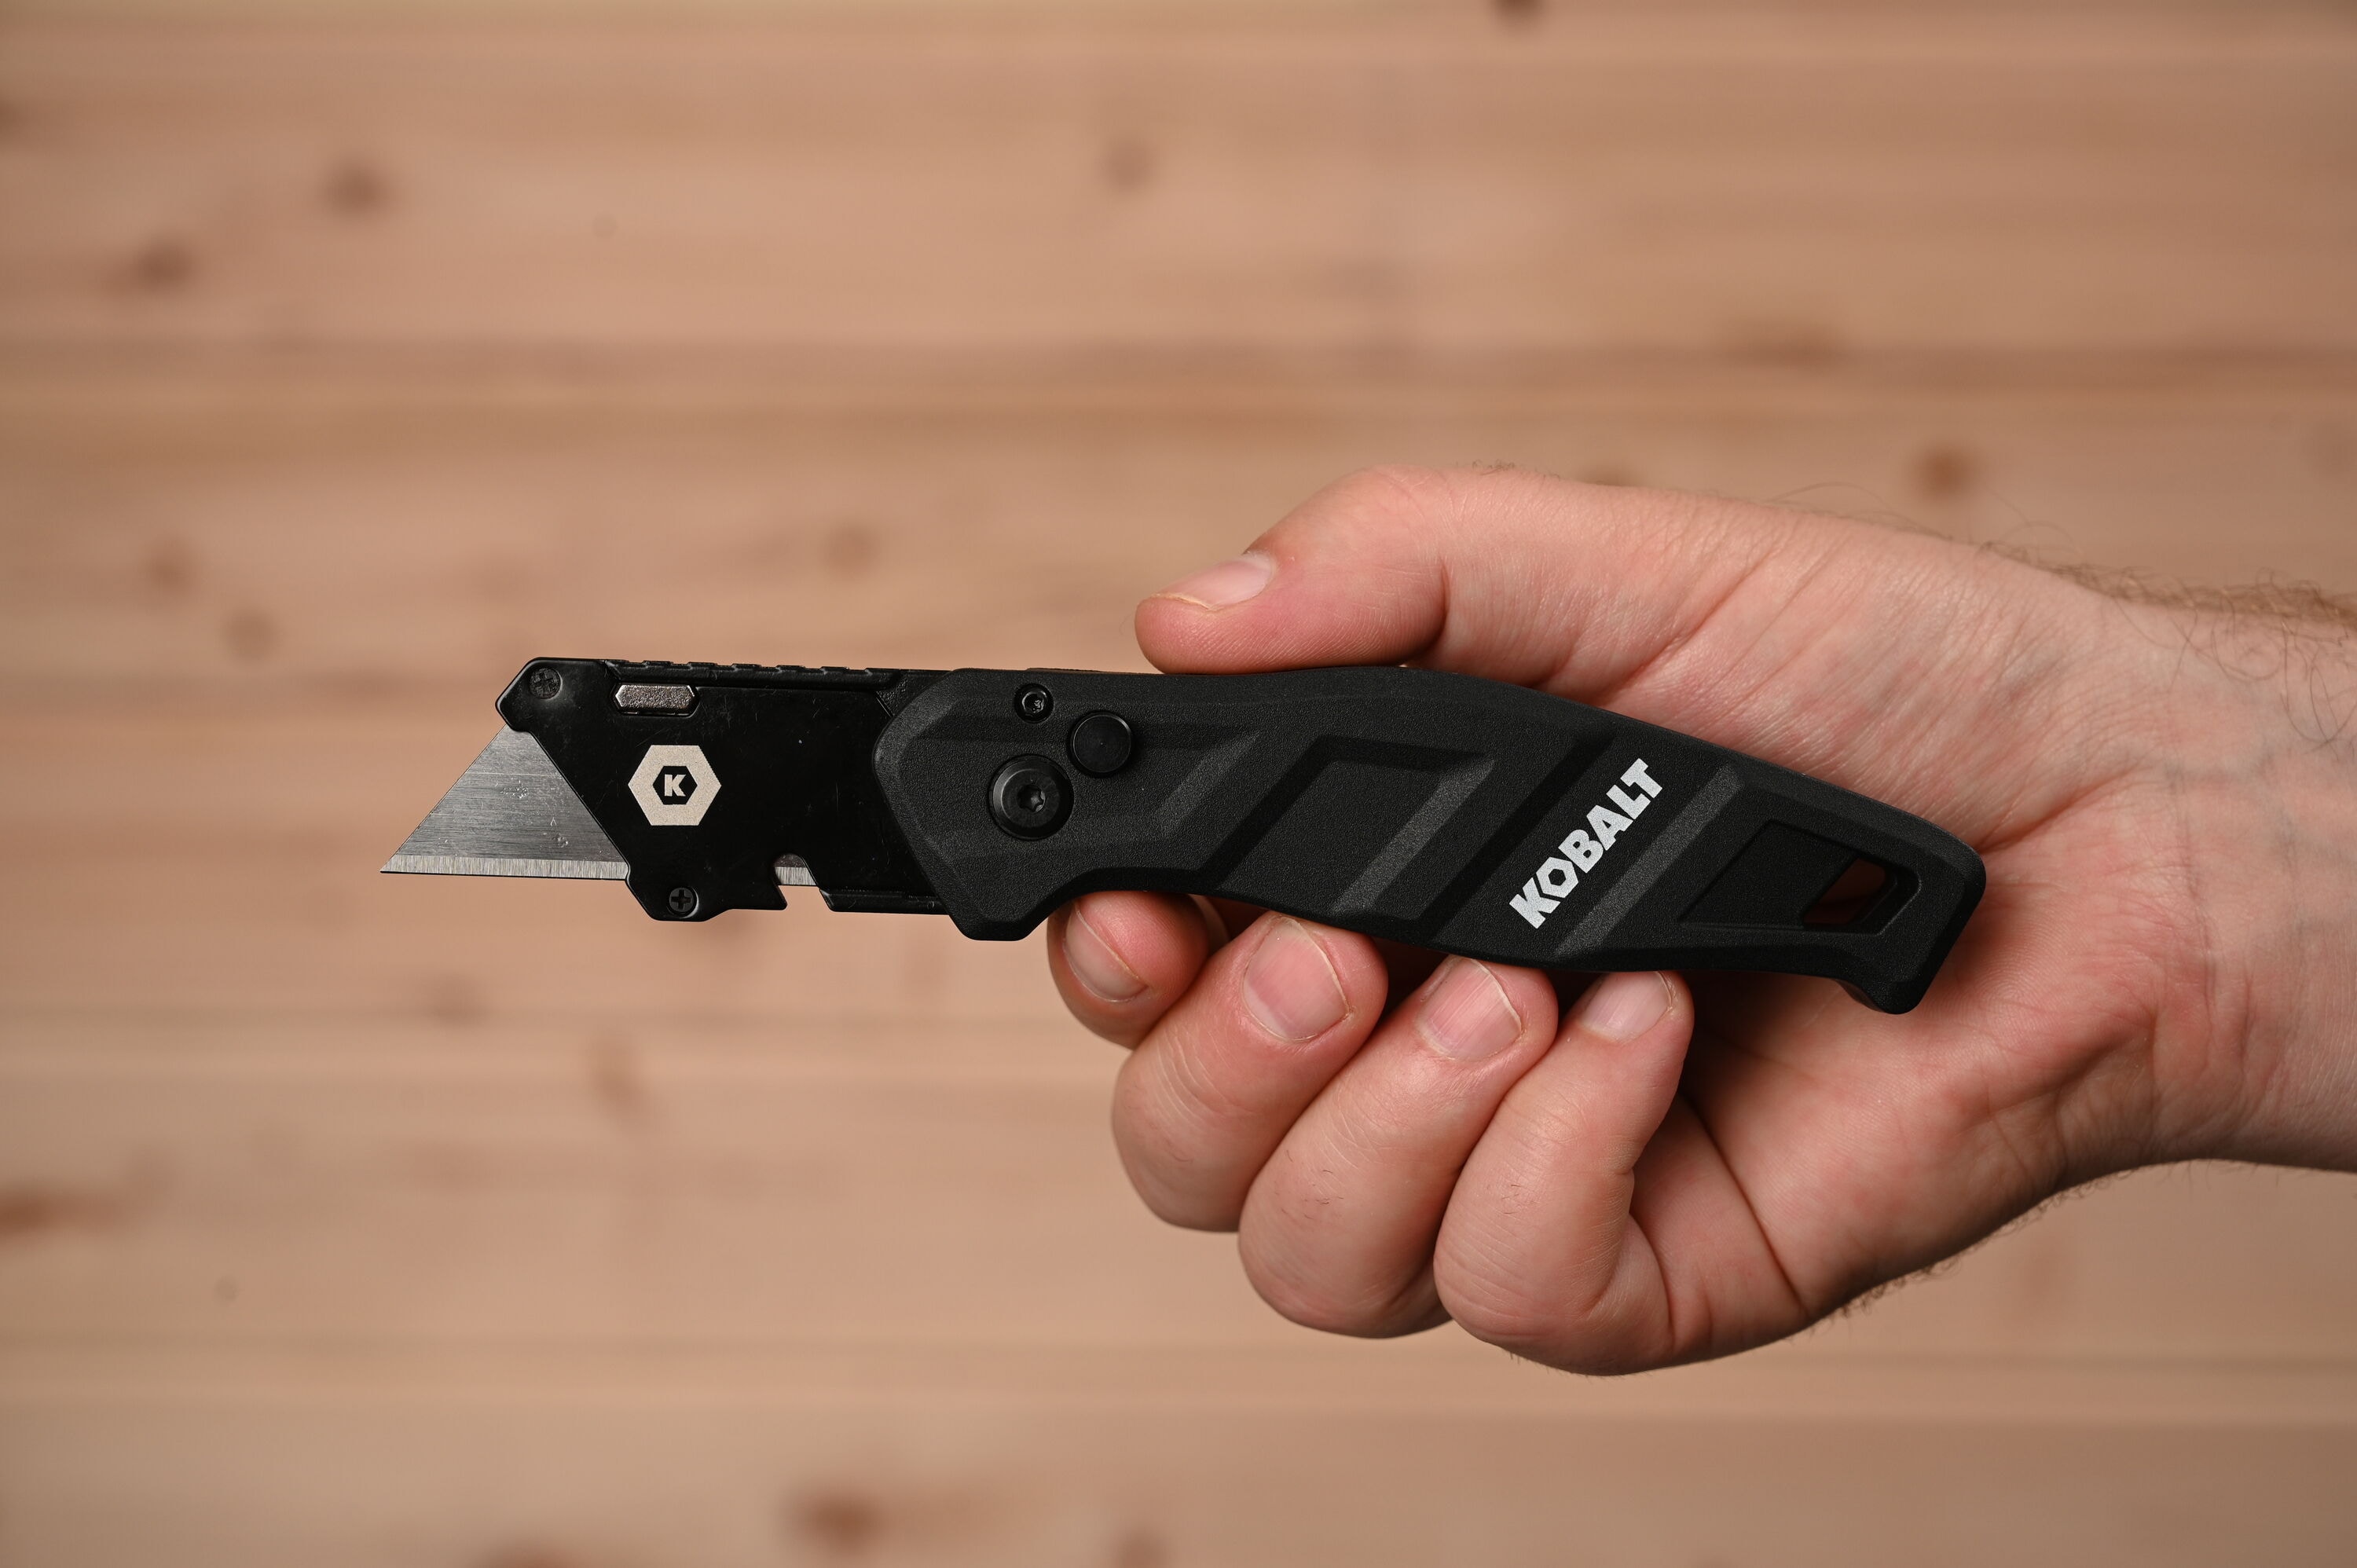 Berkling 18mm Retractable Utility Knife with 4X SK2H Snap Off Black Spare Blades, Durable and Heavy Duty Aluminum Frame